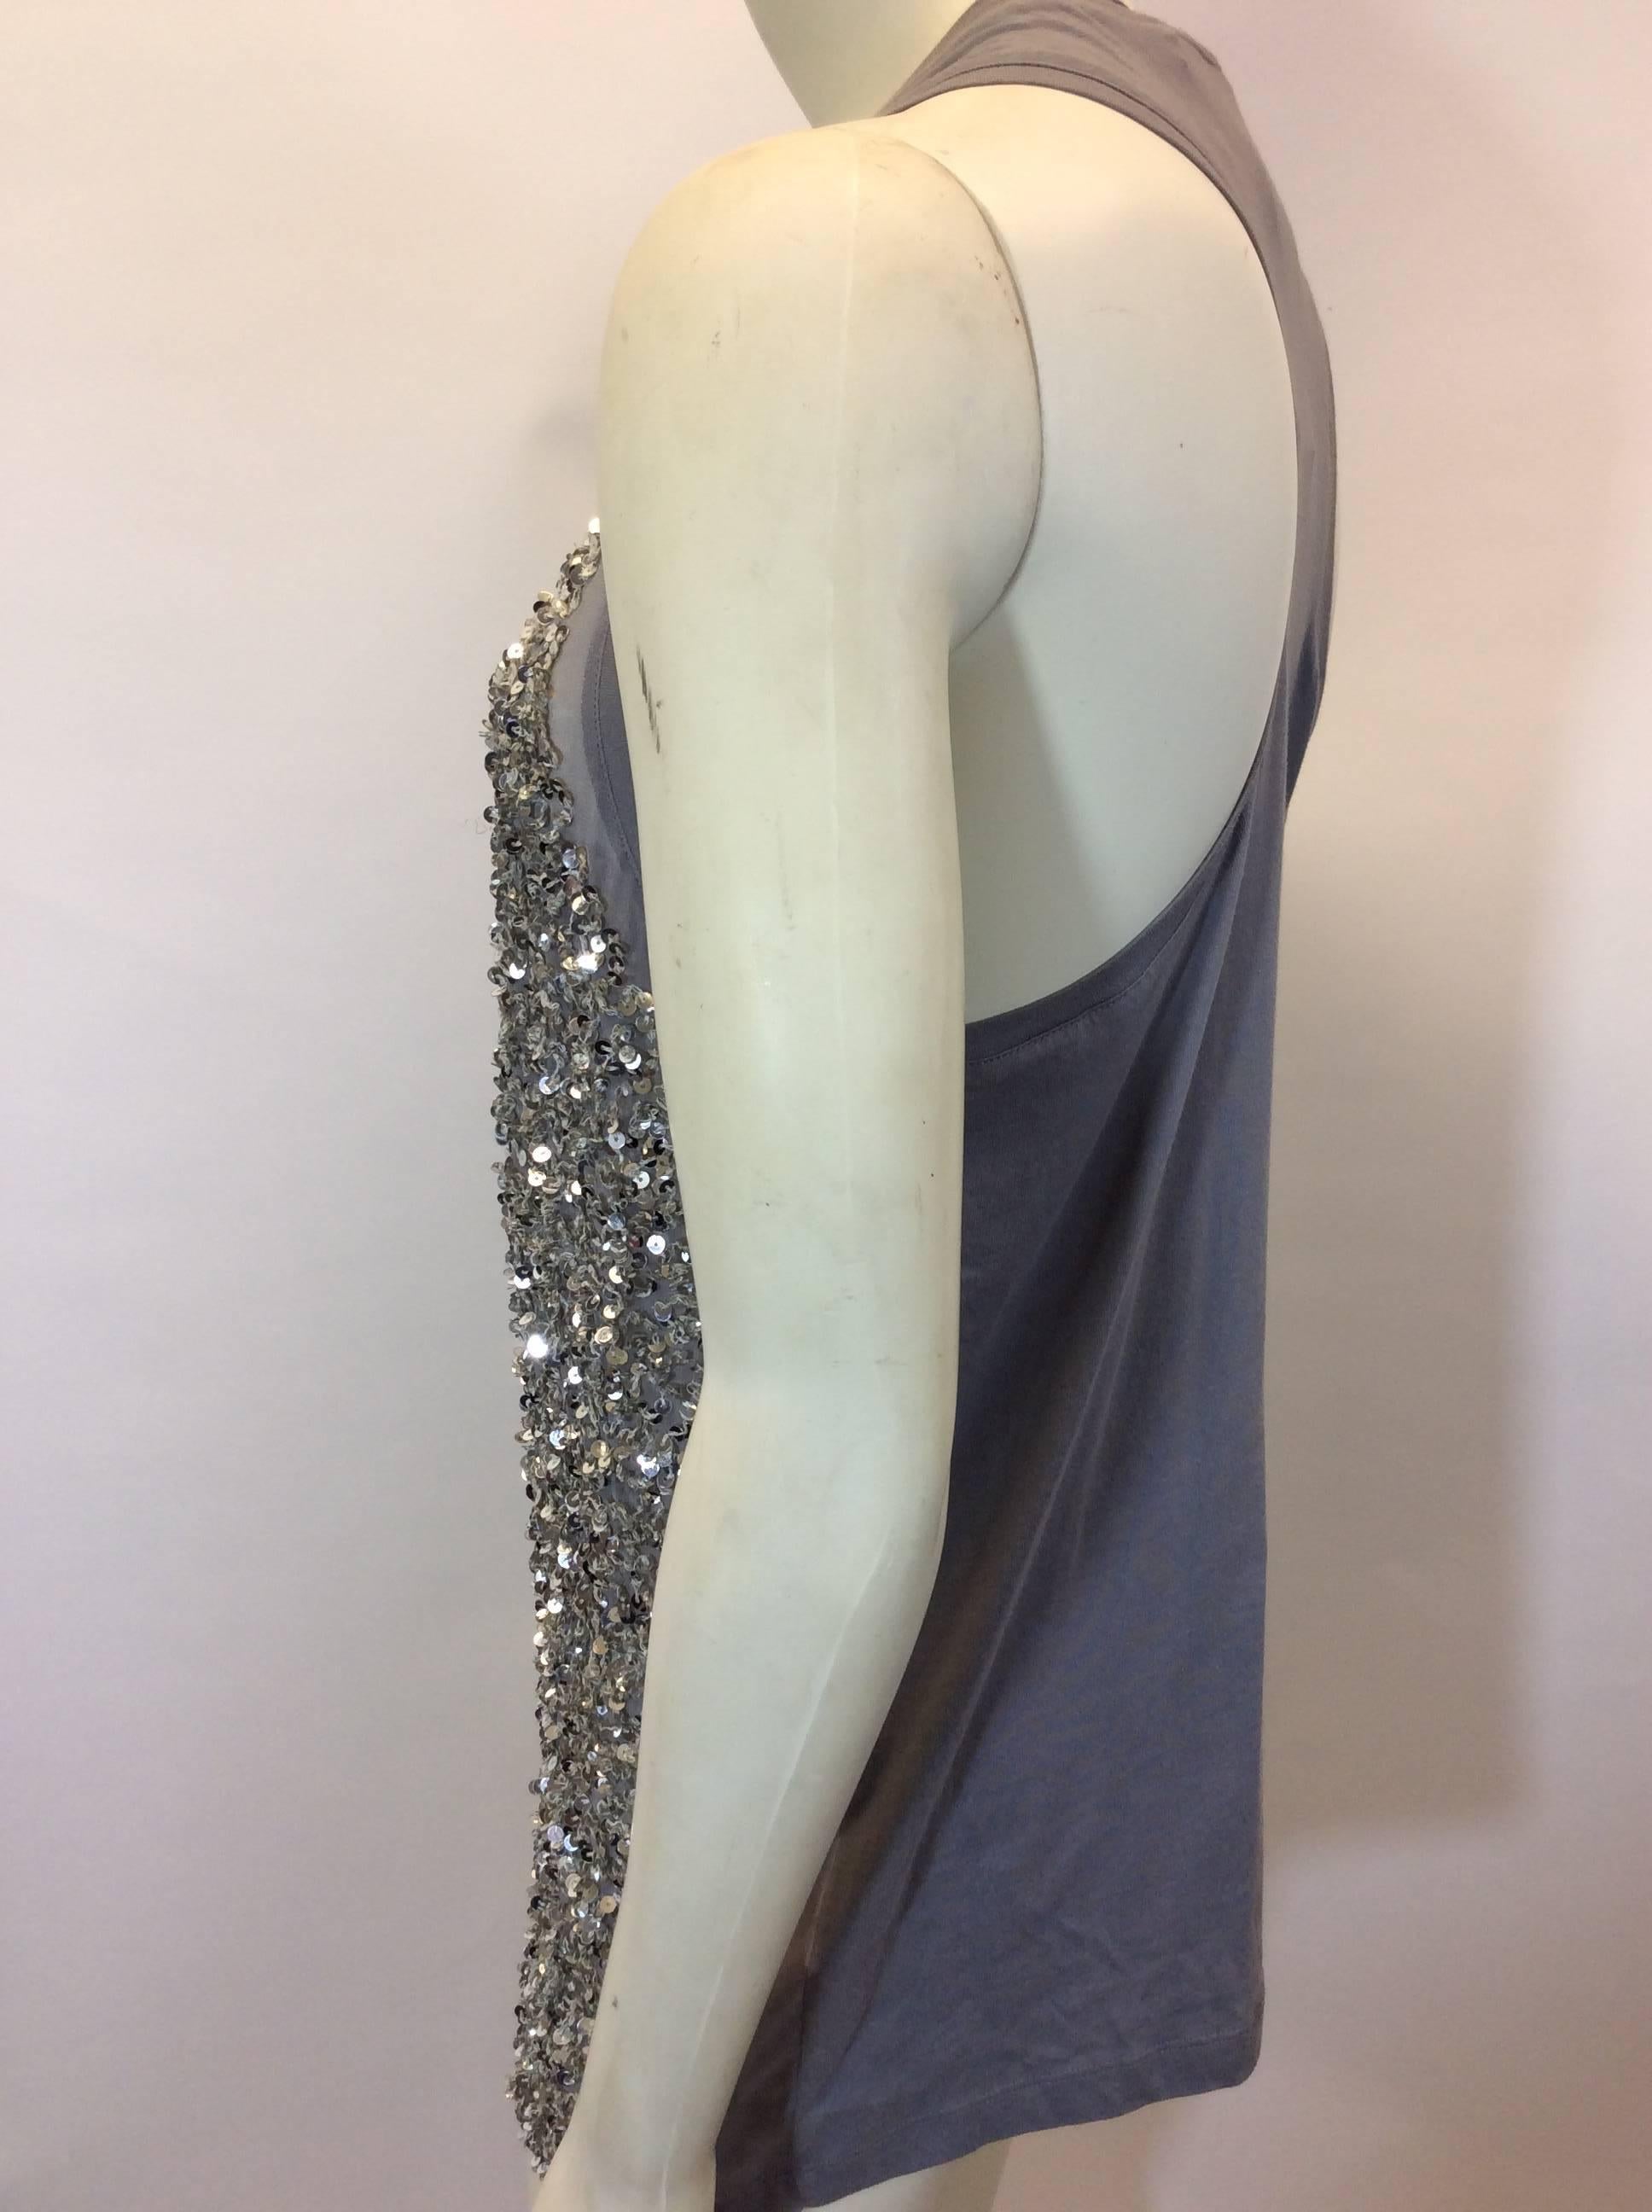 Sequined Grey Tank
Tunic length
Sequin front detail
Stretch back fabric
Racer back neckline
Size 38
100% Silk front, 100% Cotton backing